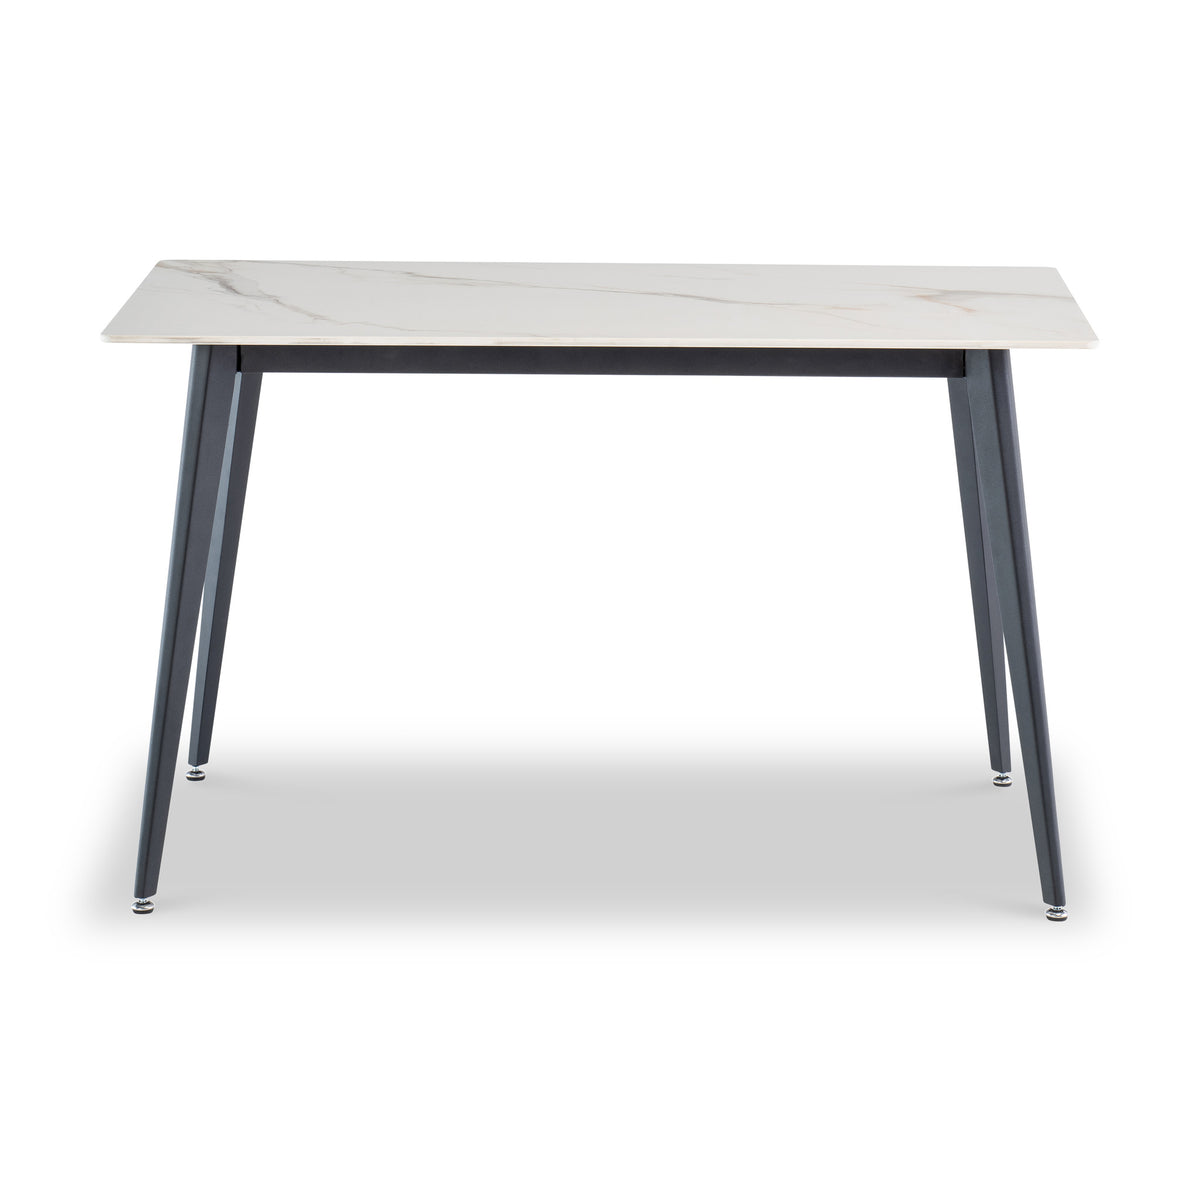 Owen White 130cm Sintered Stone Dining Table from Roseland Furniture